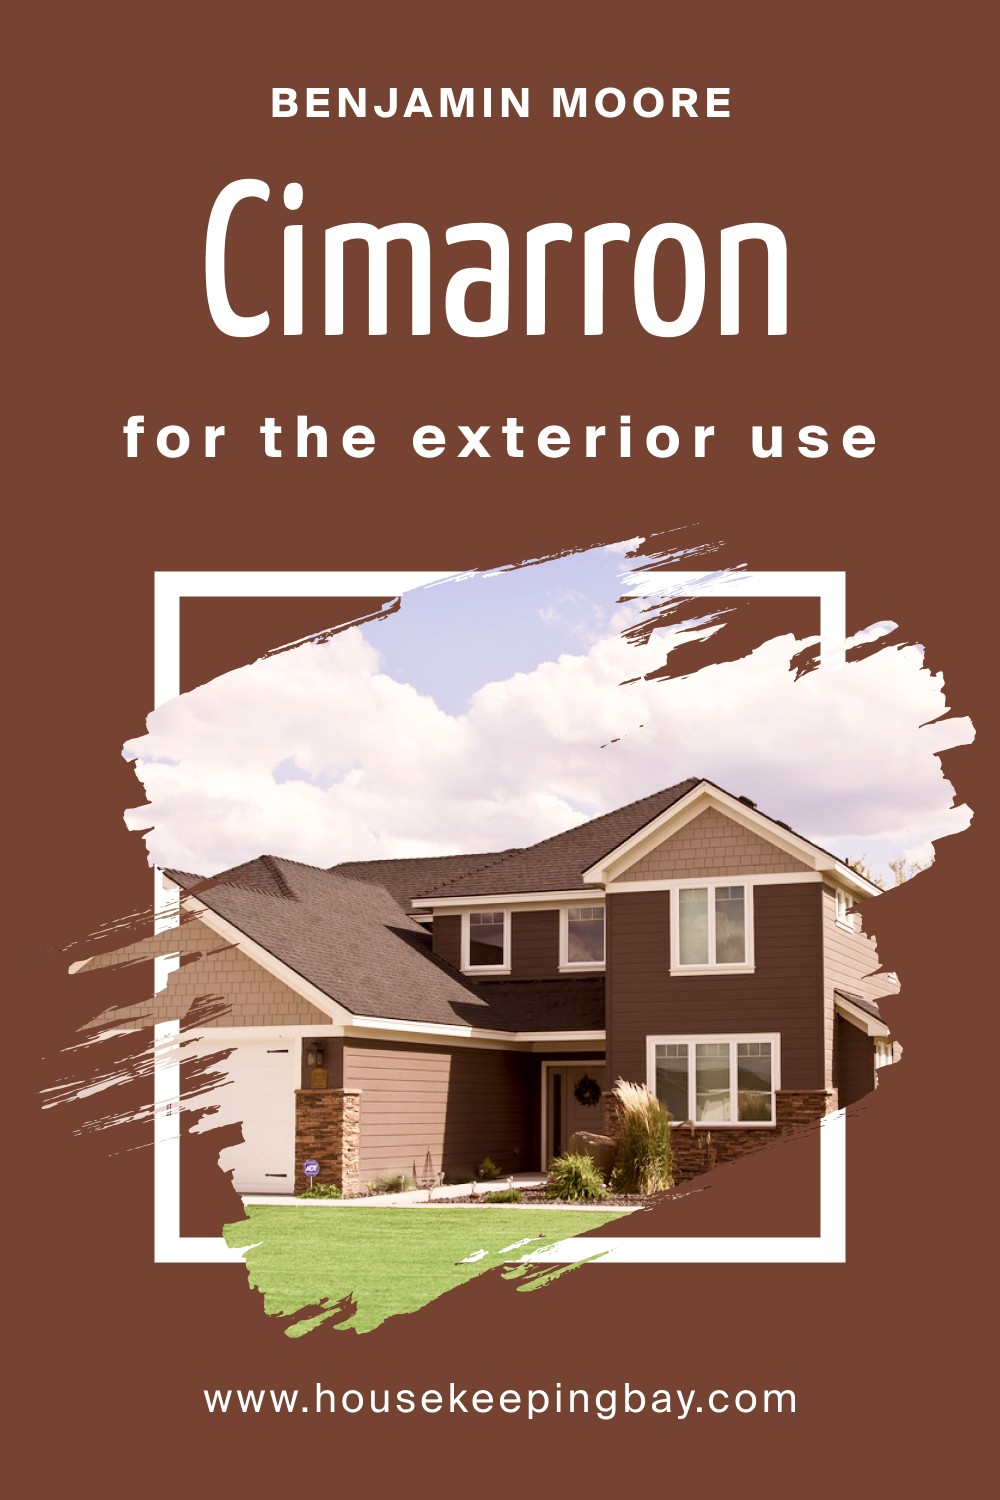 How to Use BM Cimarron 2093-10 for an Exterior?